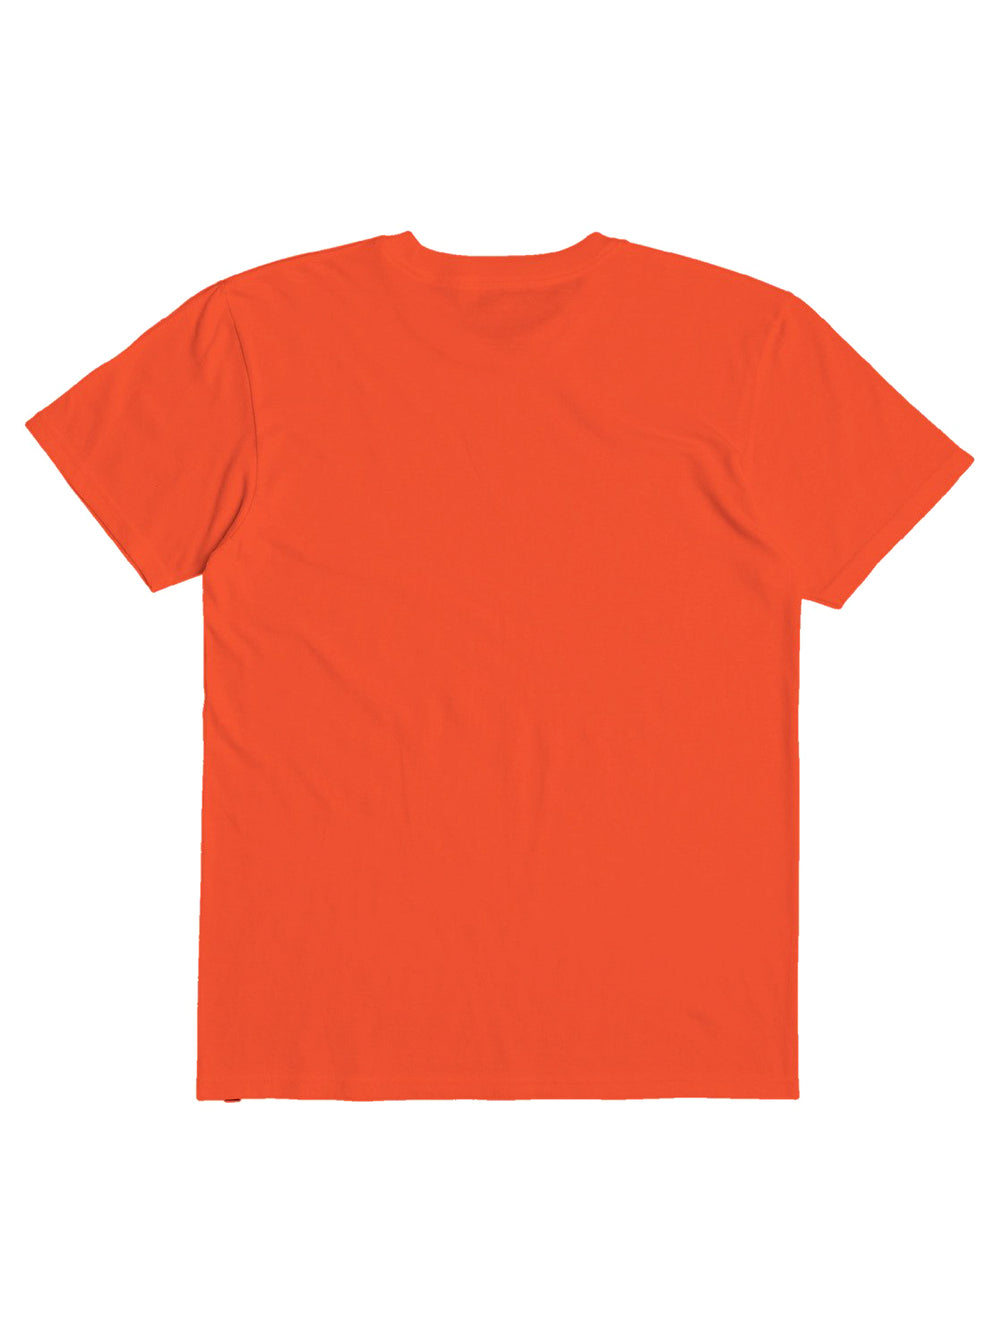 QUIKSILVER YOUTH BOYS LINED UP T-SHIRT - CLEARANCE